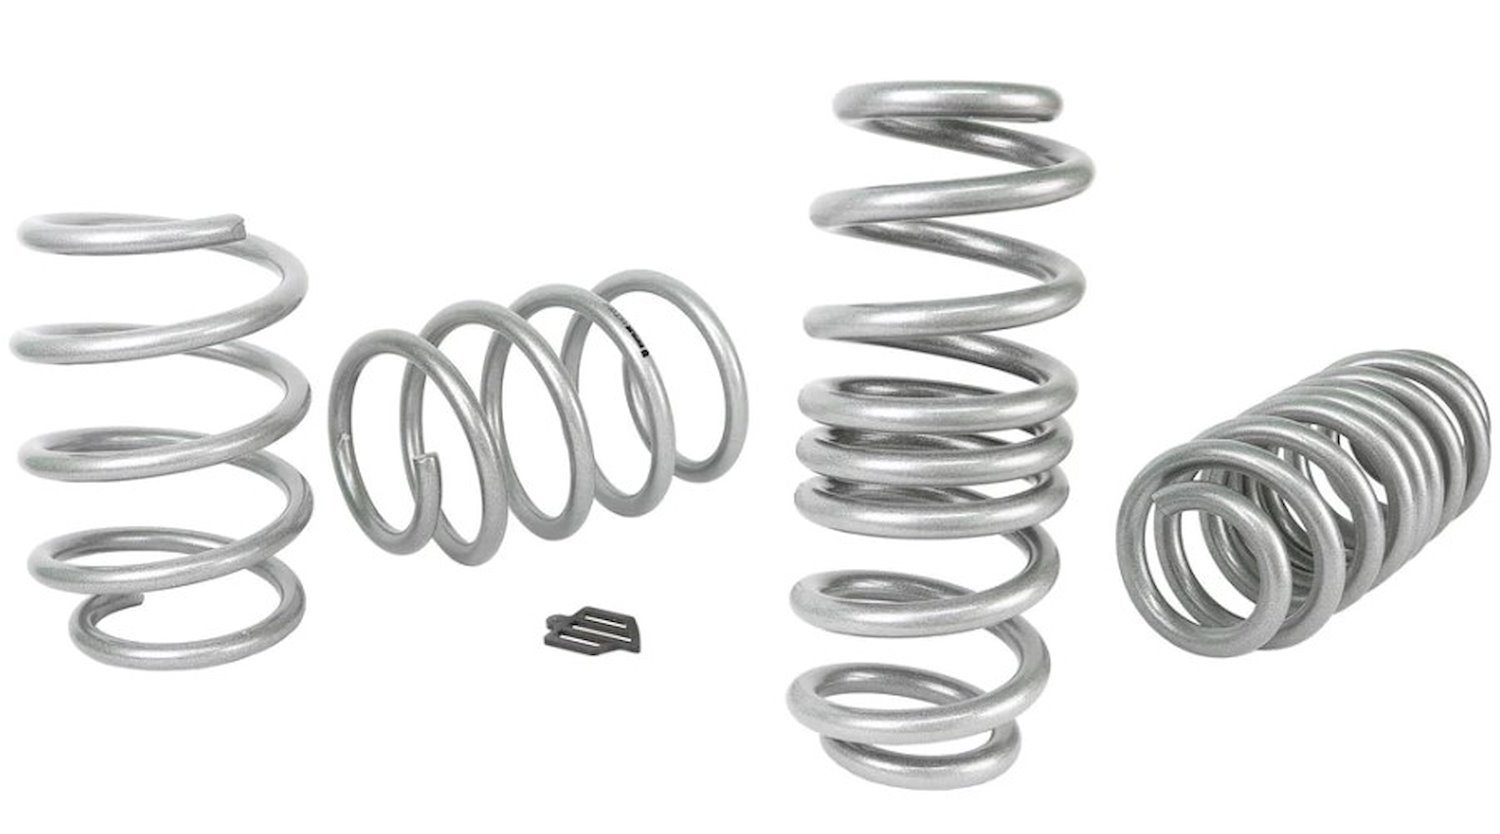 WSK-AUD001 Performance Lowering Springs for 2015-2020 Audi S3,